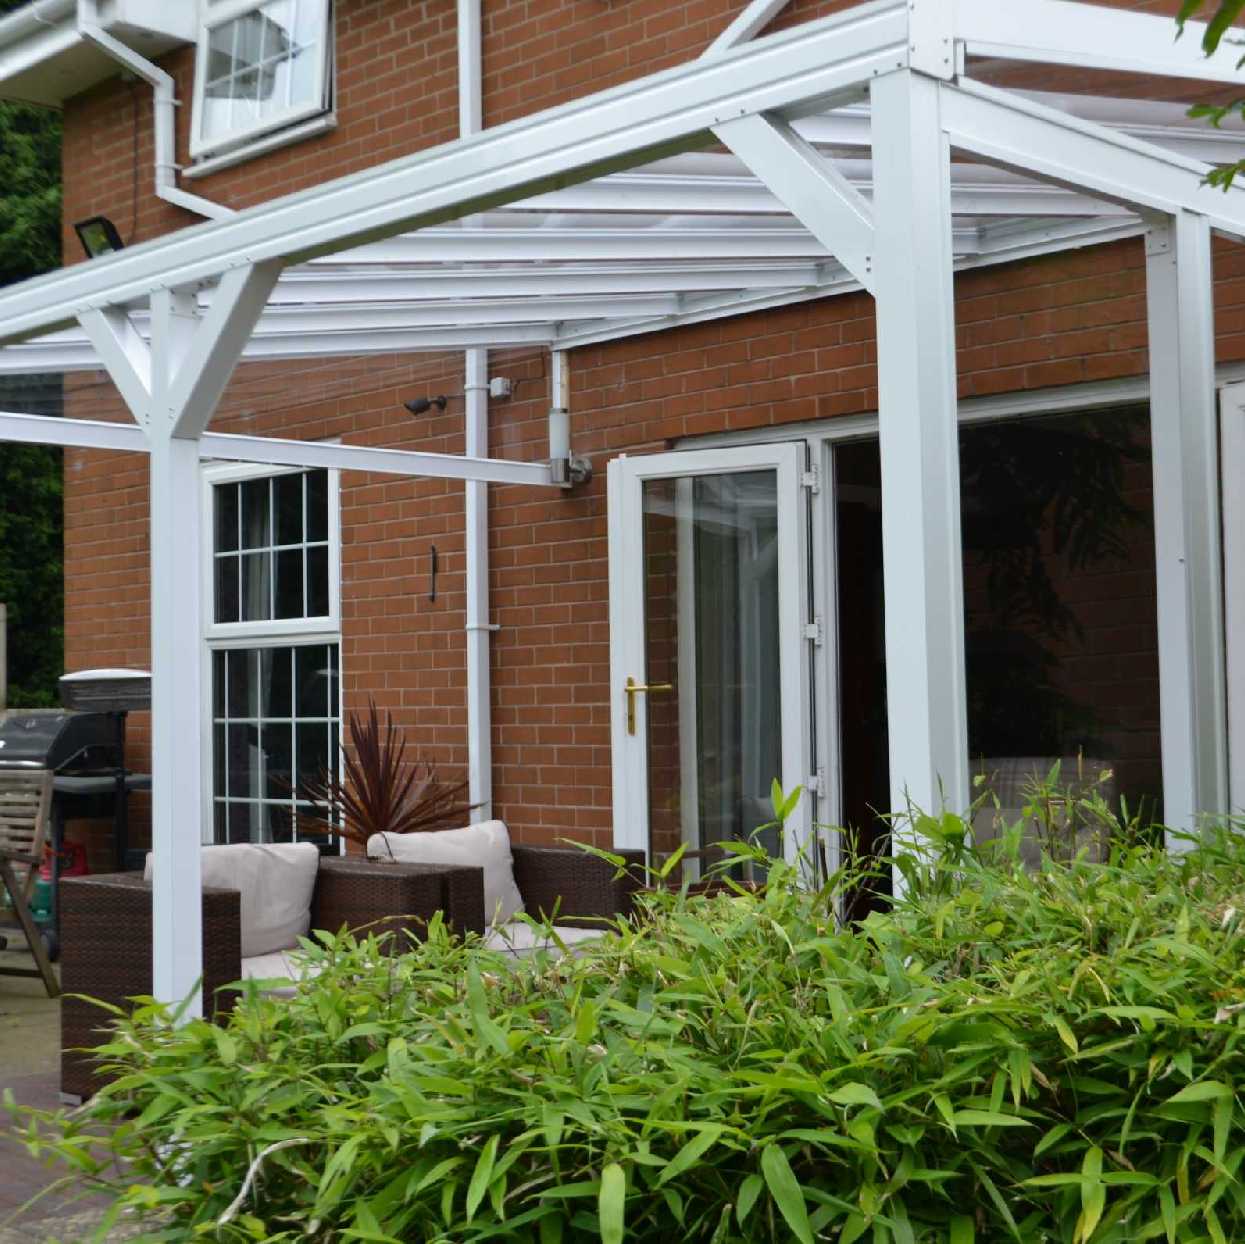 Omega Smart Lean-To Canopy, White UNGLAZED for 6mm Glazing - 6.3m (W) x 2.5m (P), (4) Supporting Posts from Omega Build